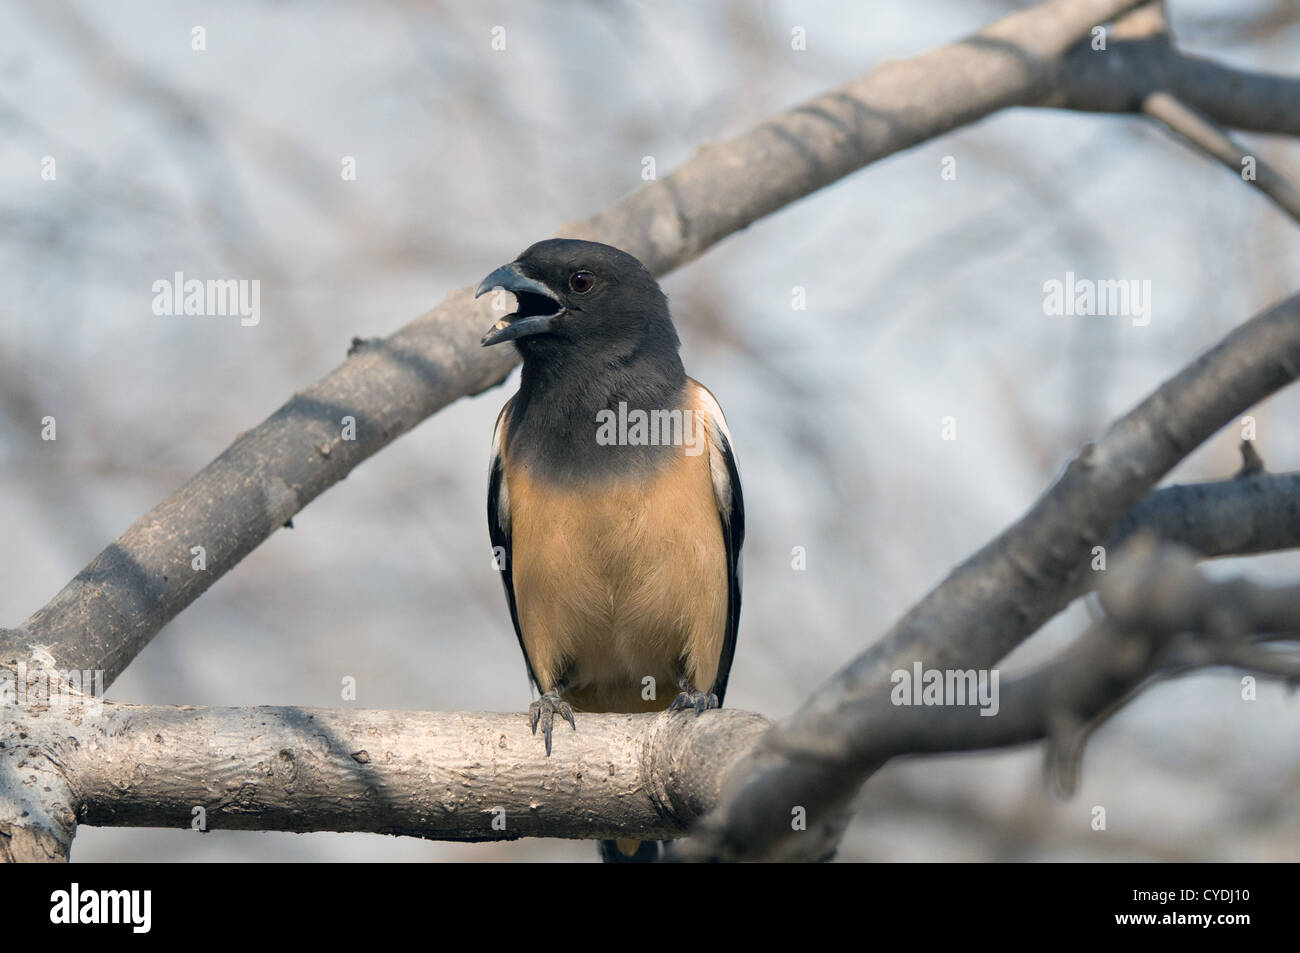 Treepie perched on branch Stock Photo